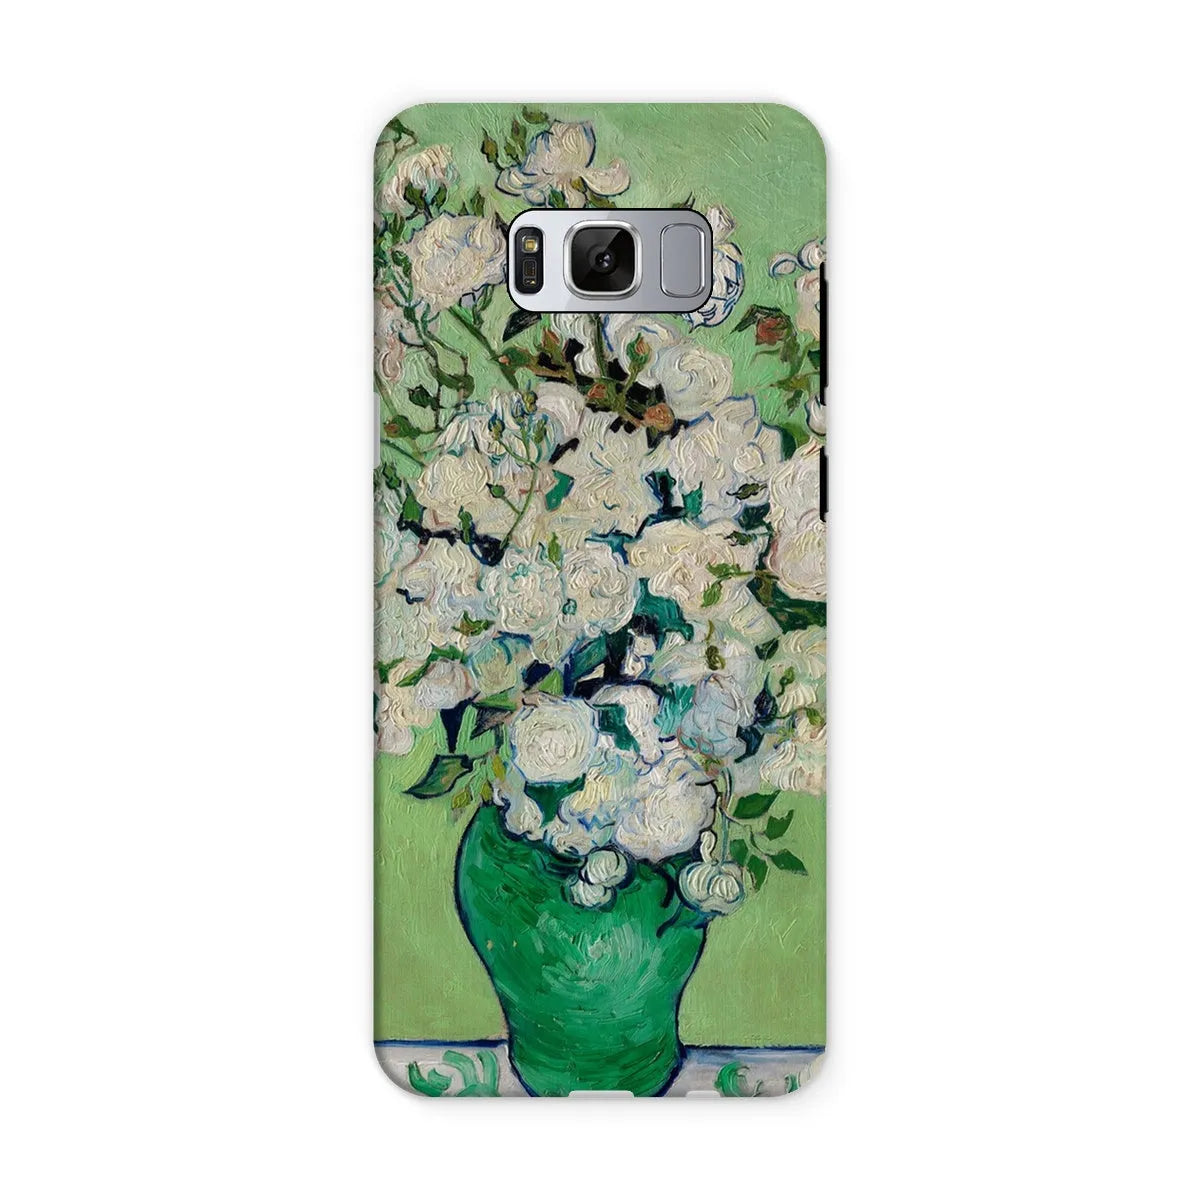 Roses - Post-impressionist Phone Case - Vincent Van Gogh - Samsung Galaxy S8 / Matte - Mobile Phone Cases - Aesthetic